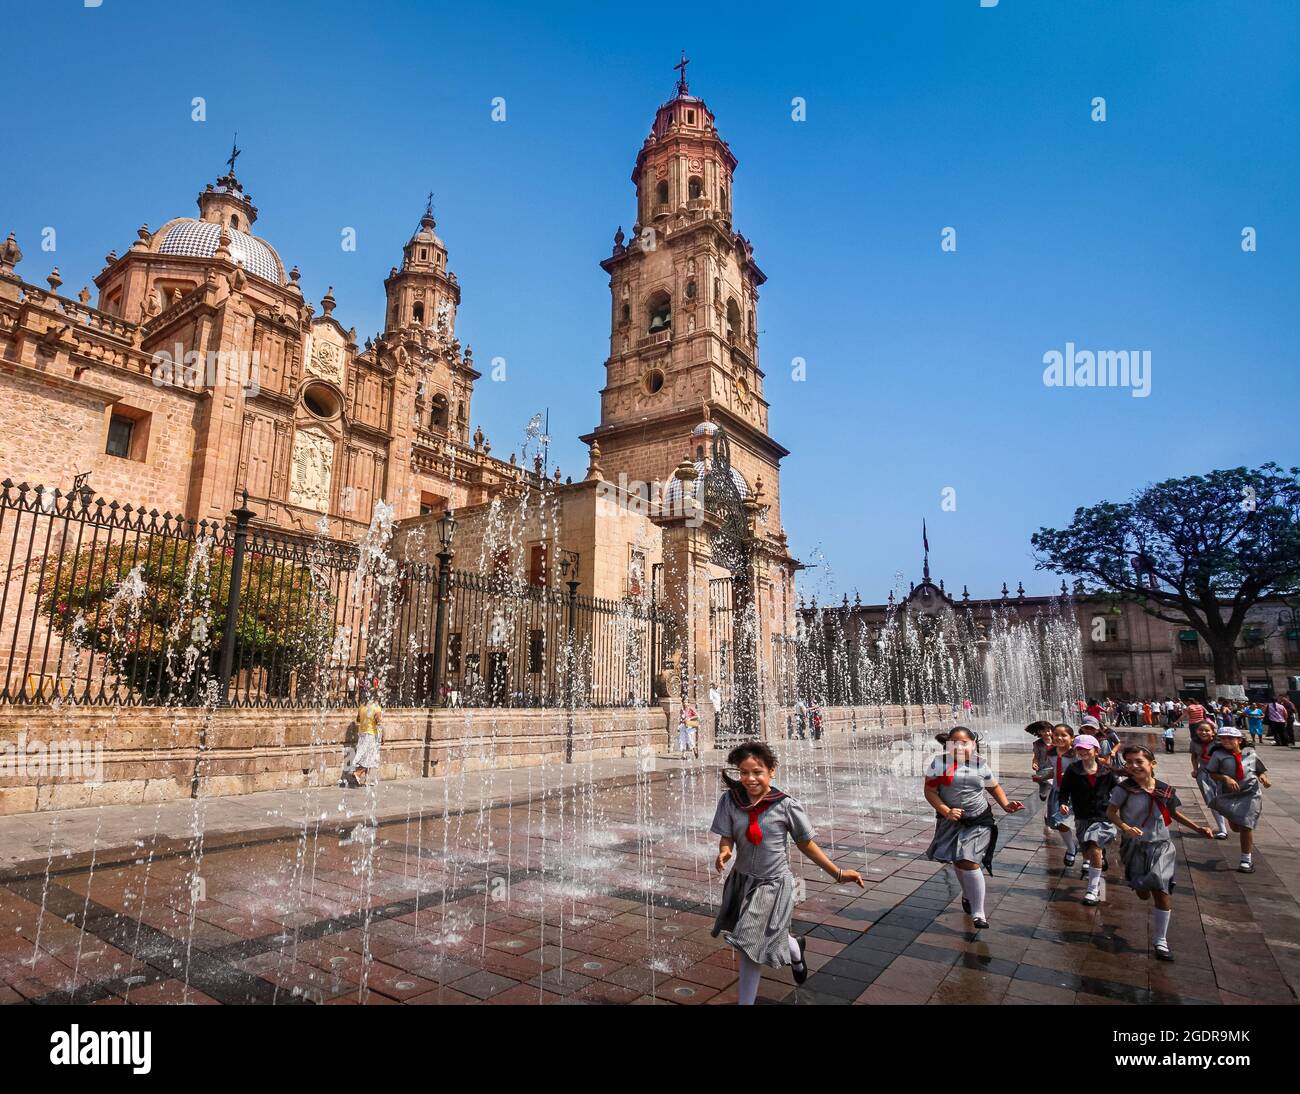 Schoolgirls run through a fountain in the plaza next to the cathedral in Morelia, Michoacan, Mexico. Stock Photo